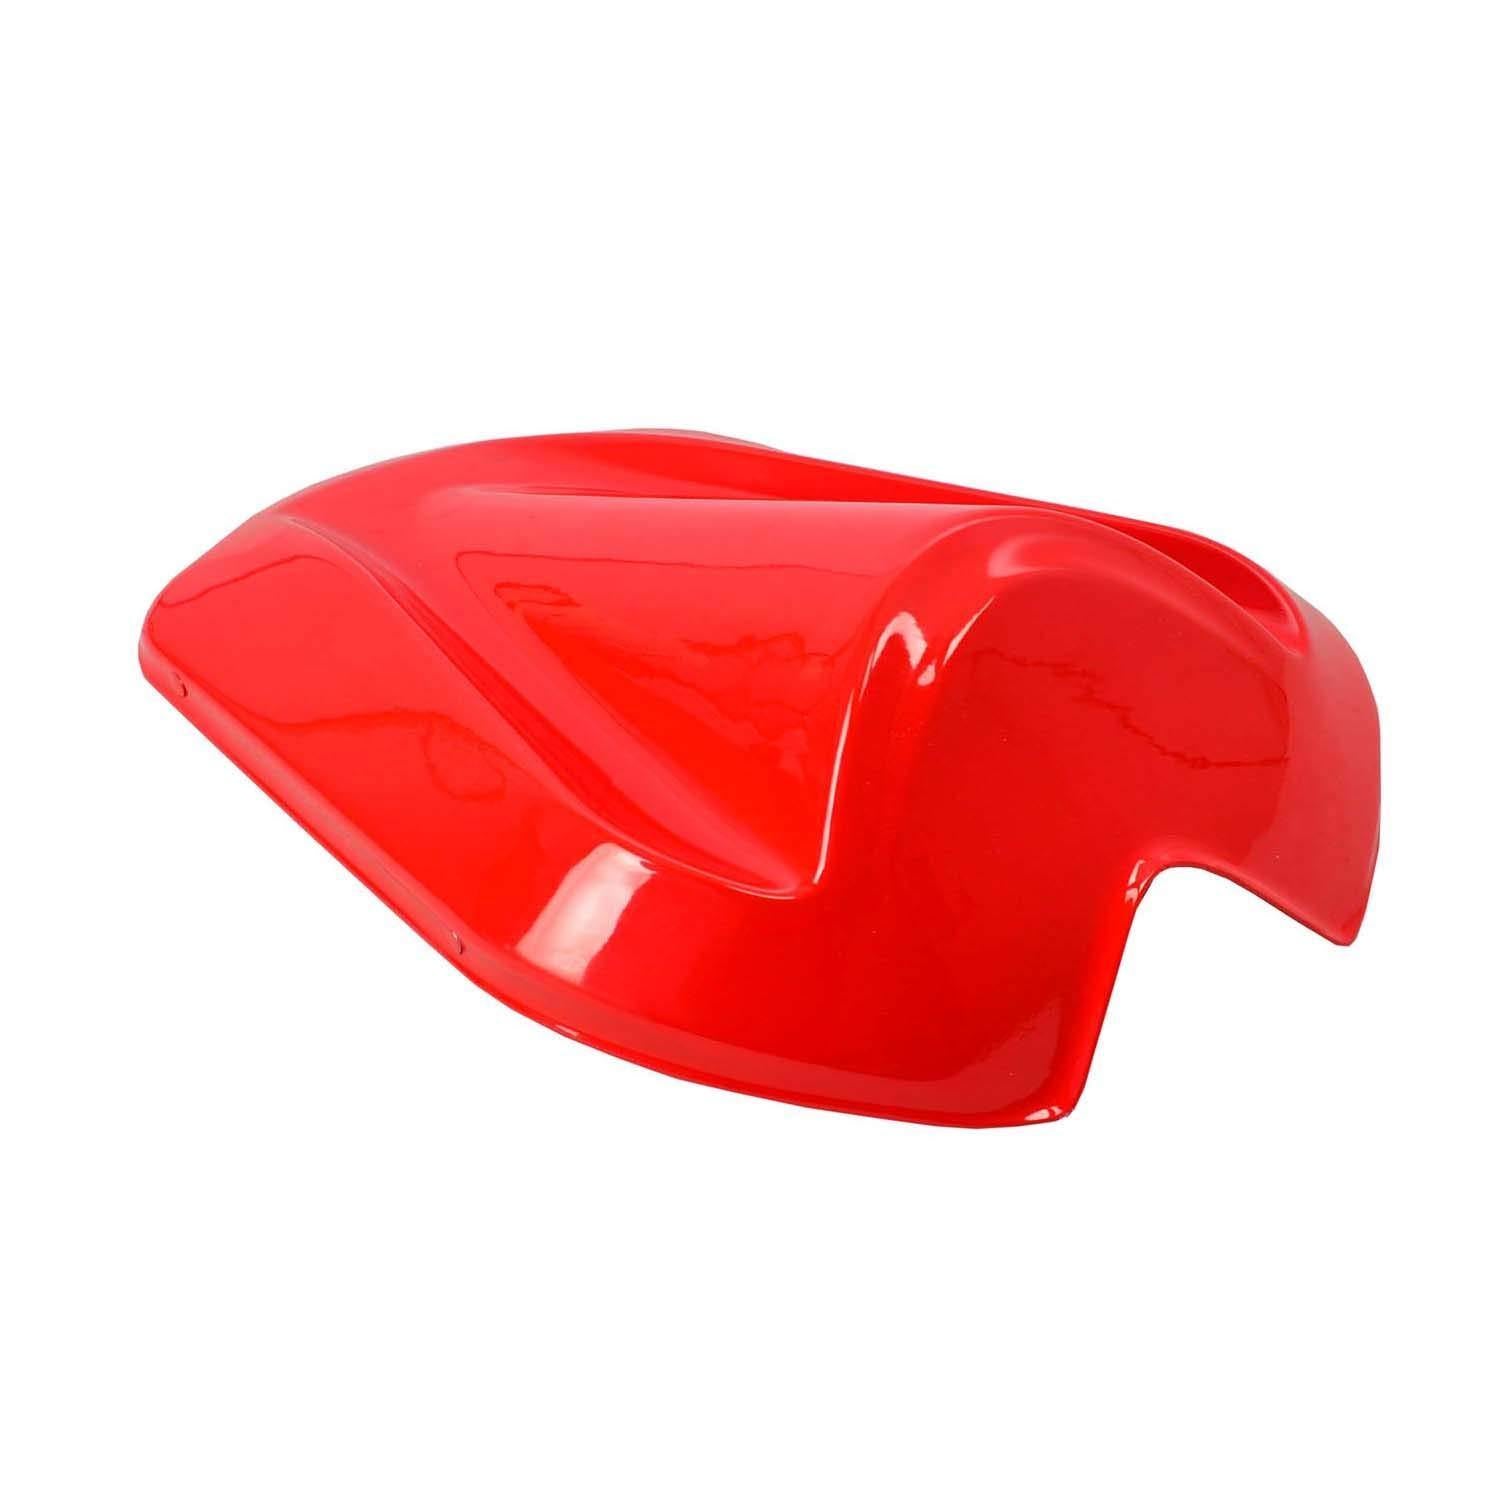 R15 V3 Seat Cowl- Red (Premium Quality) - Premium Seat Cowl from Sparewick - Just Rs. 1650! Shop now at Sparewick